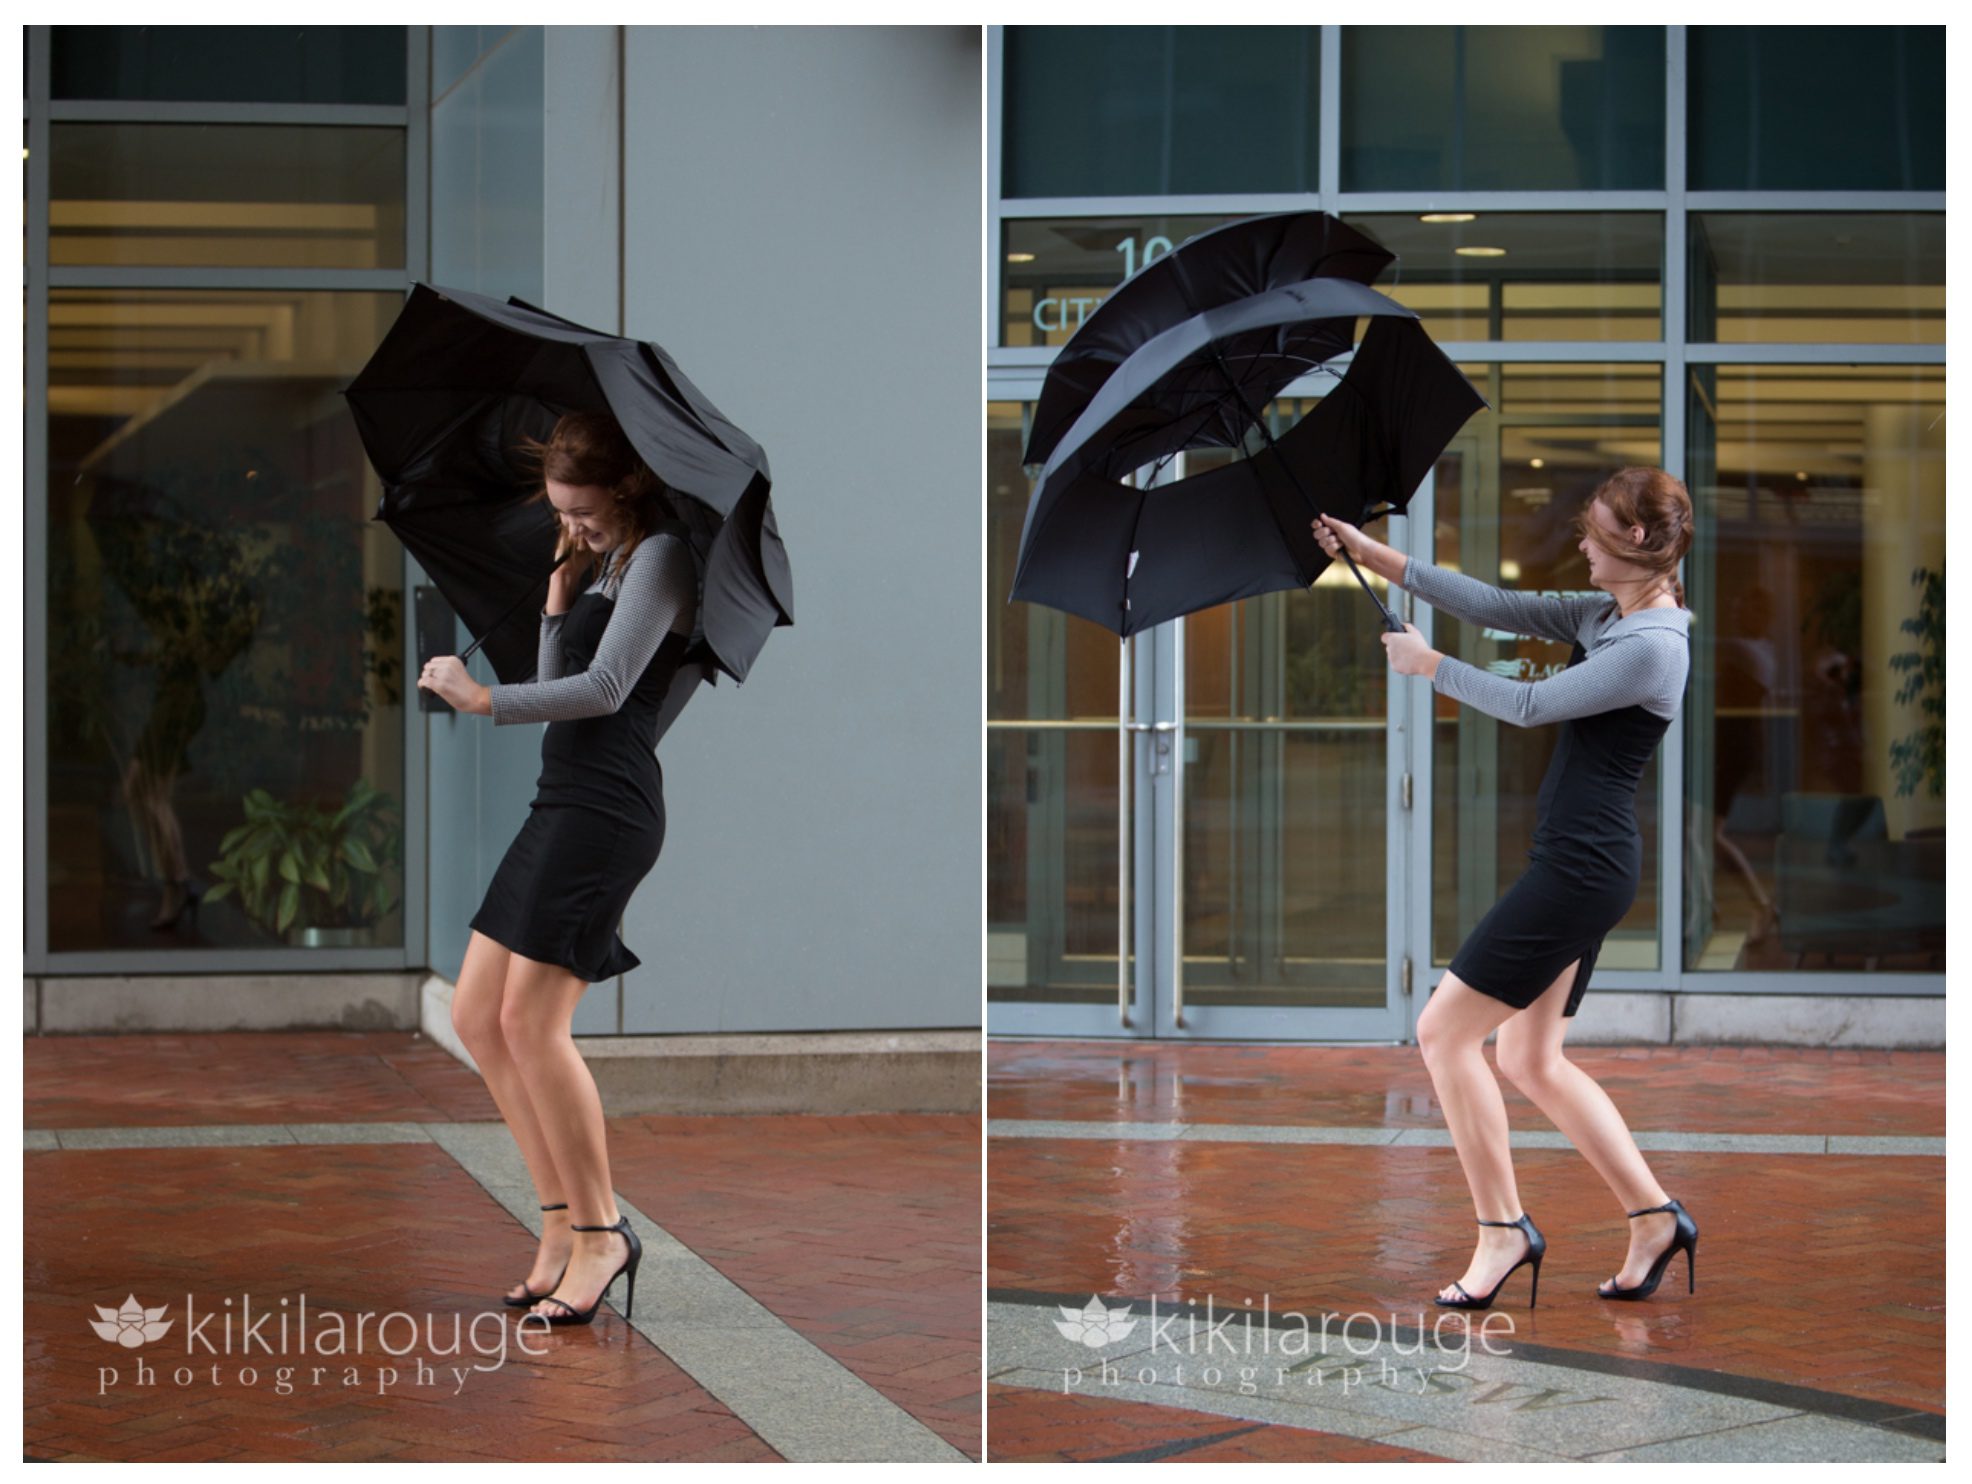 Girl with umbrella being blown in stormy weather Boston